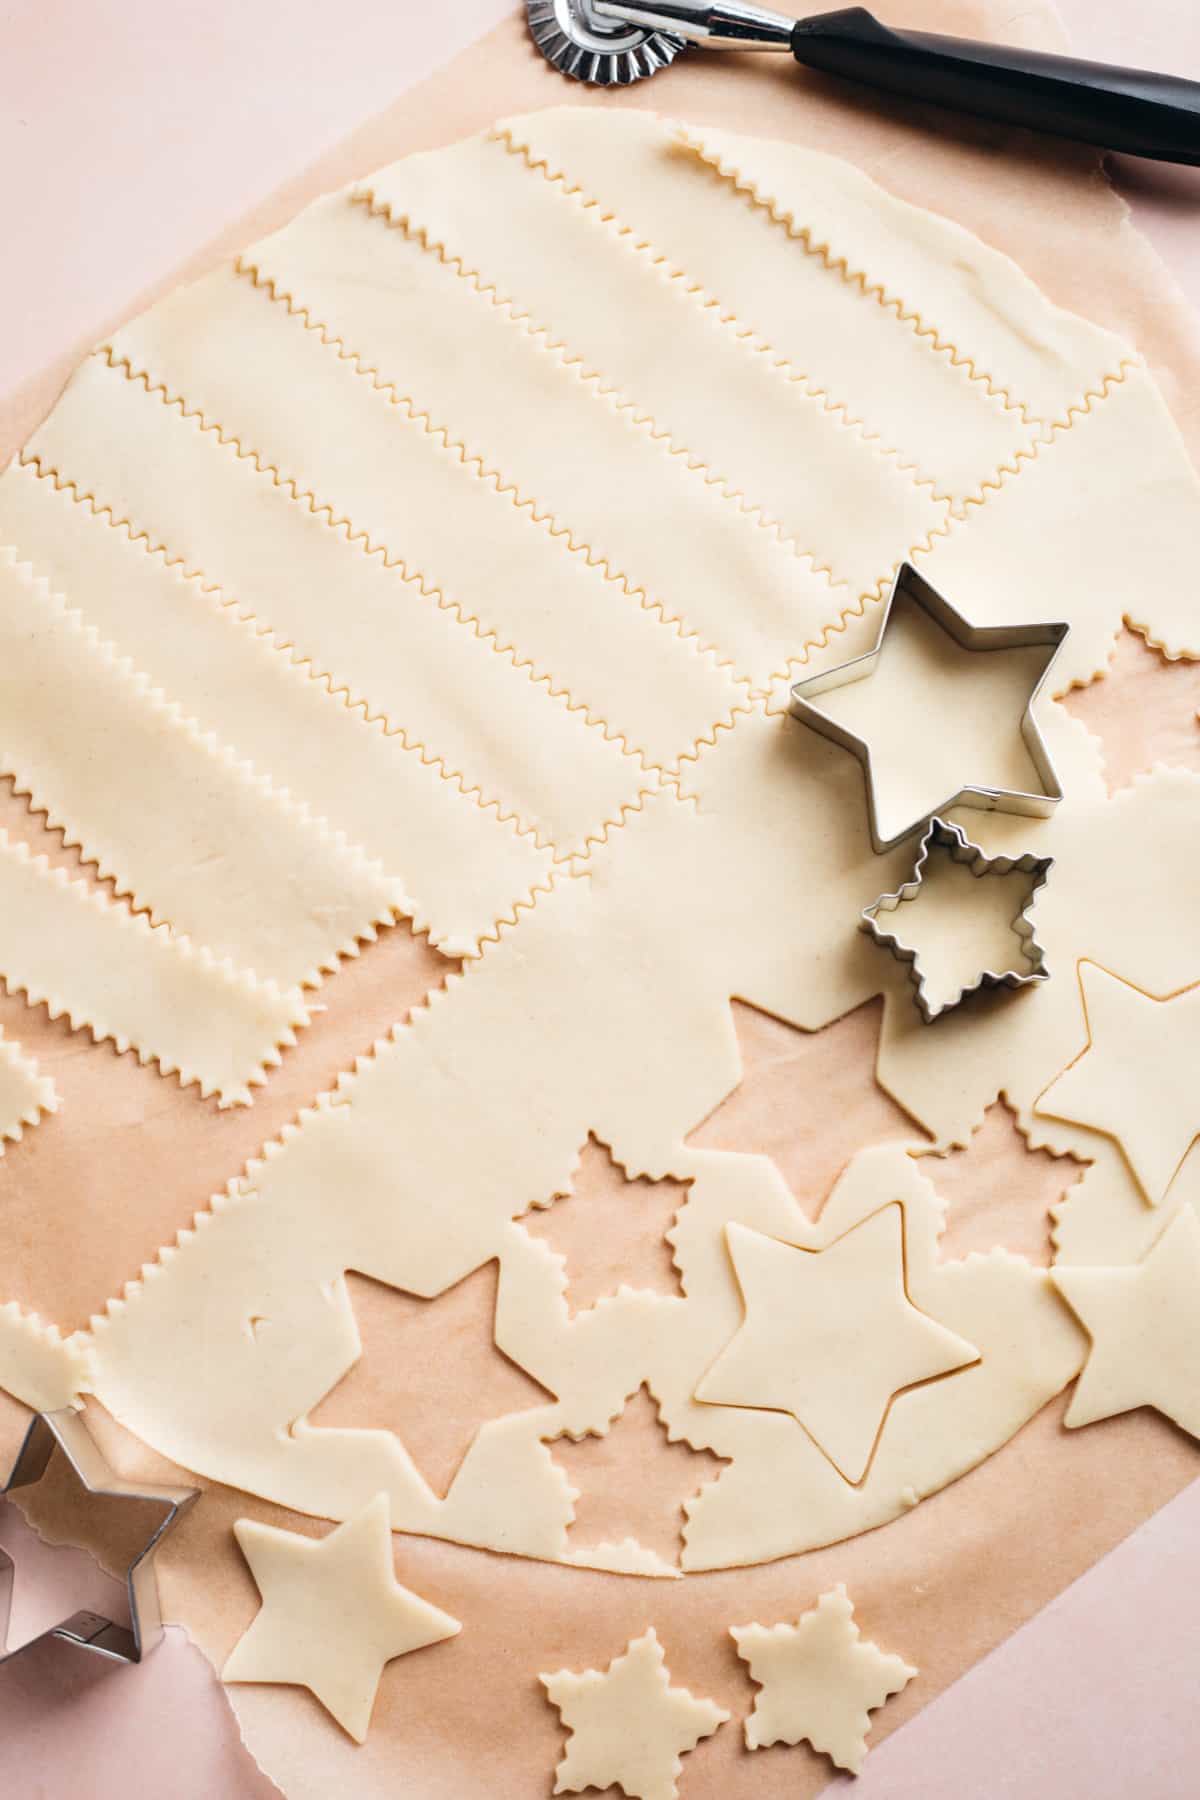 Pie crust rolled out on parchment paper and star cookie cutters and stripes being cut out.